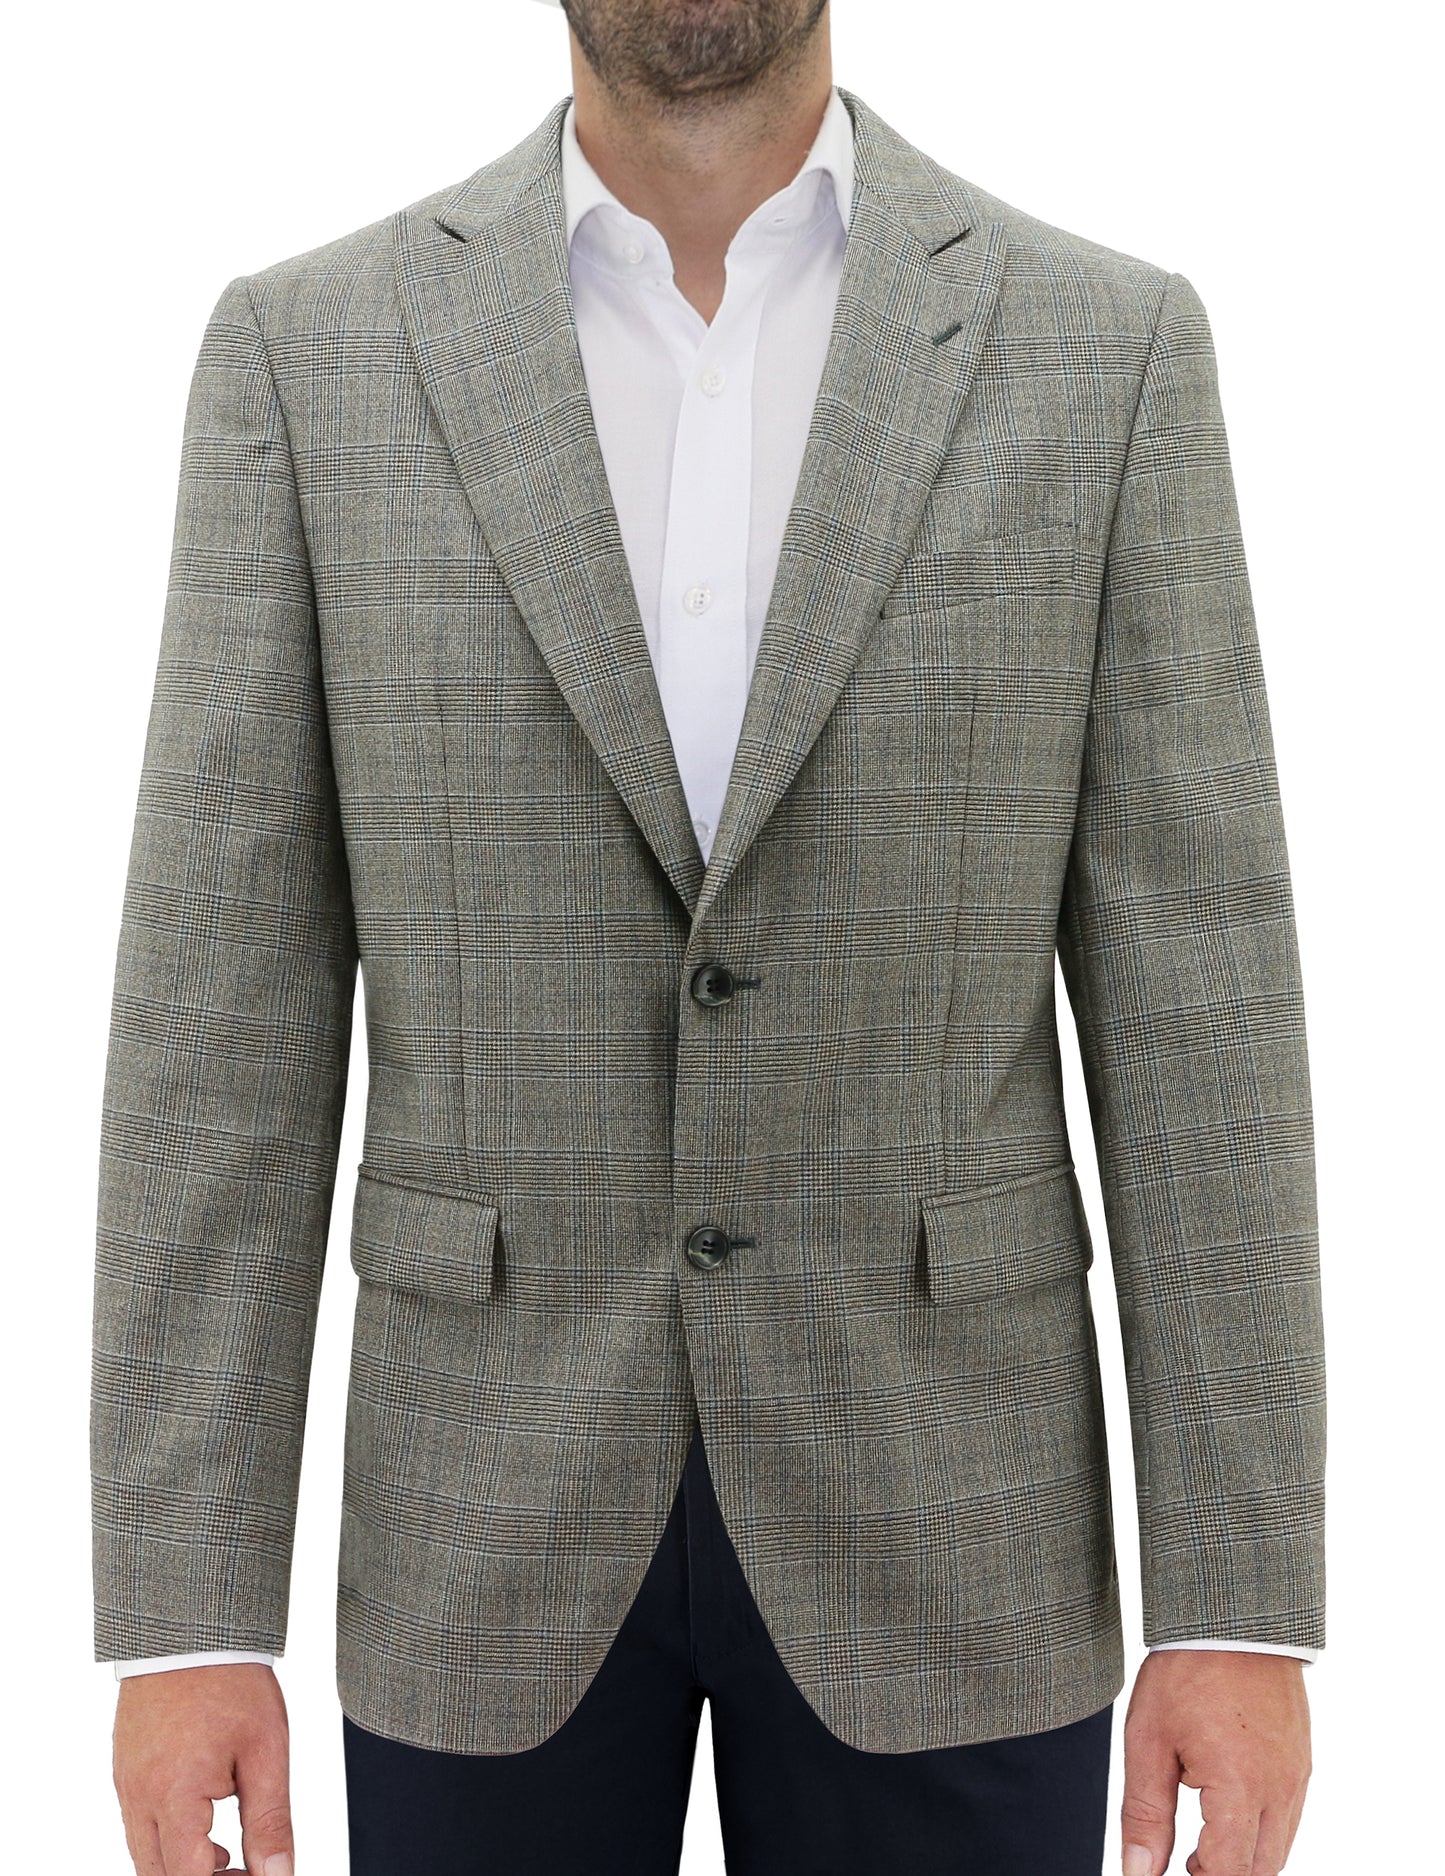 Moscow Bronze Check Sports Jacket